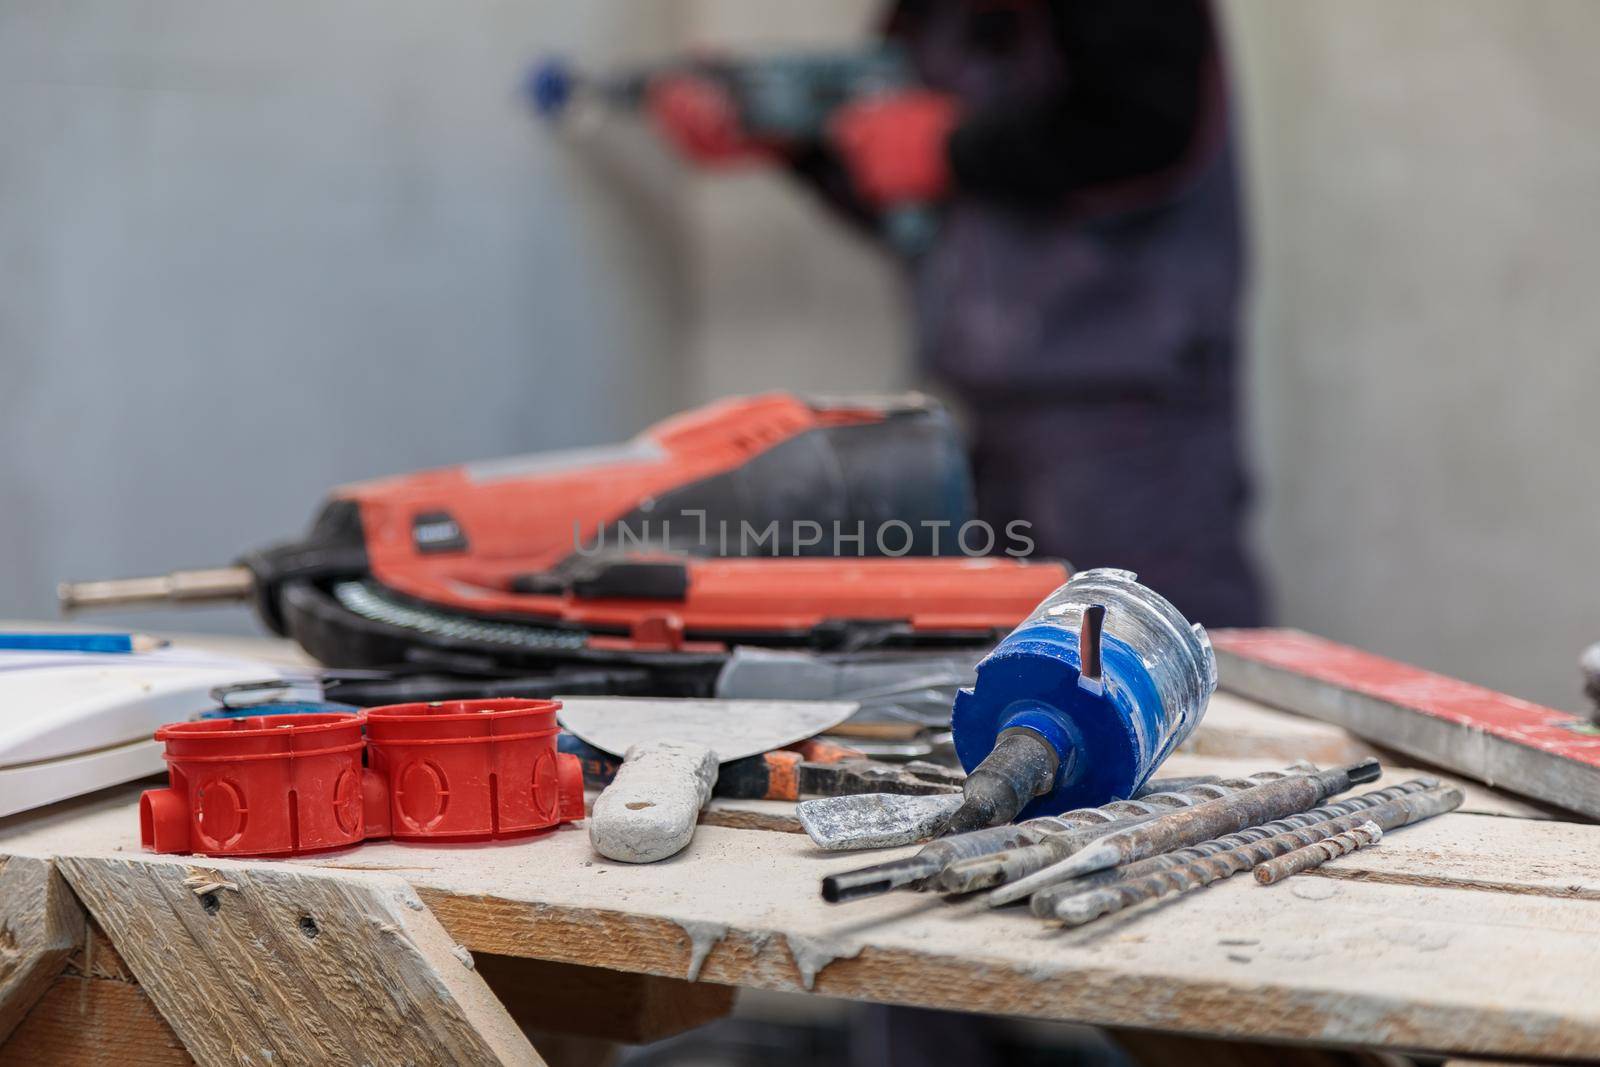 An electrician drills holes for sockets with a diamond core bit. Close-up